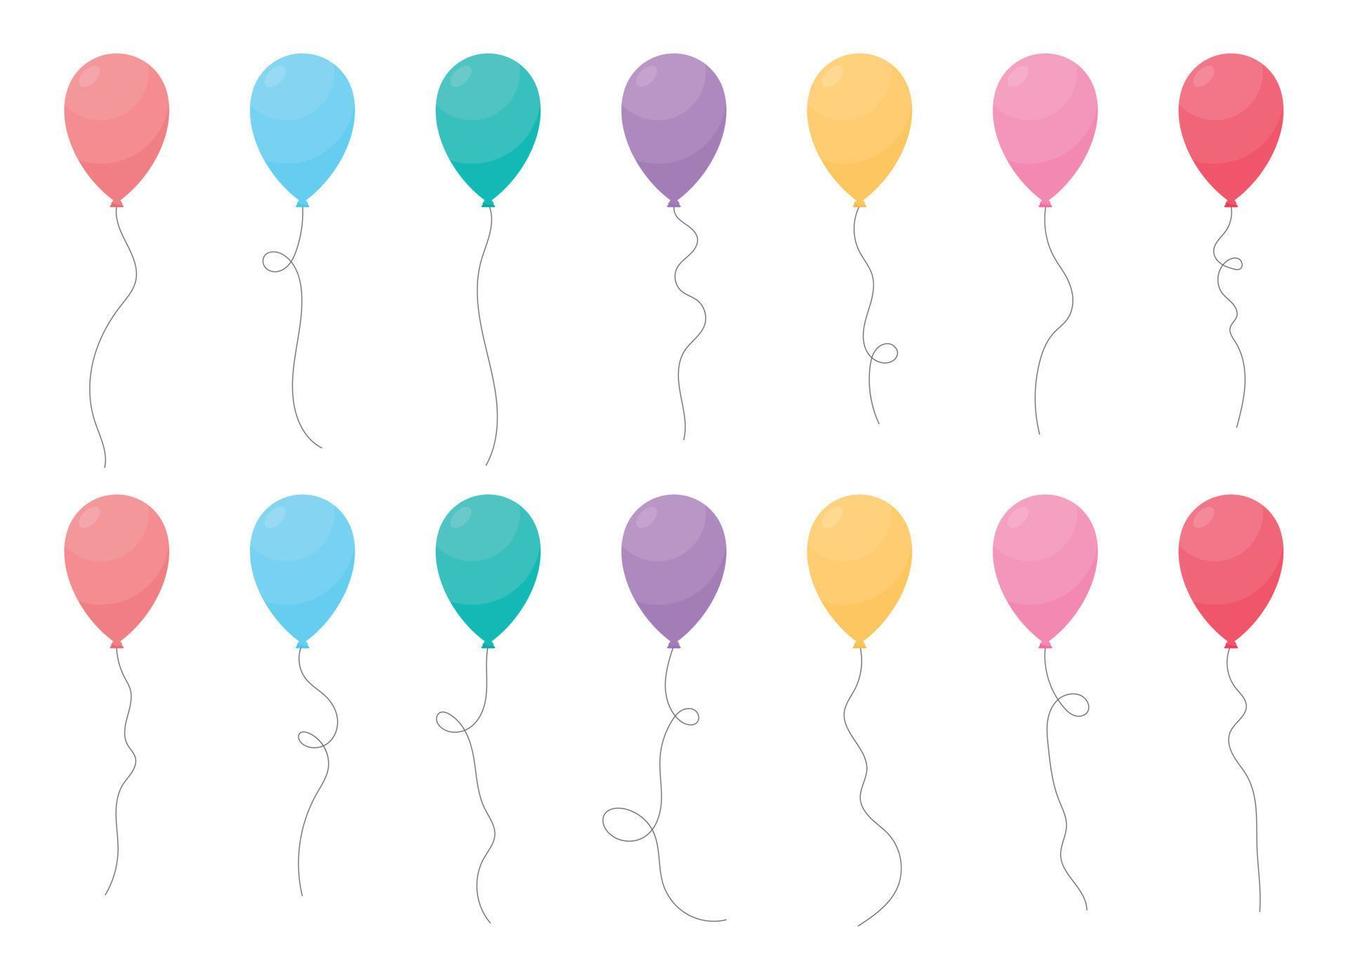 Set of colored party balloons tied with strings. Vector illustration in cartoon style